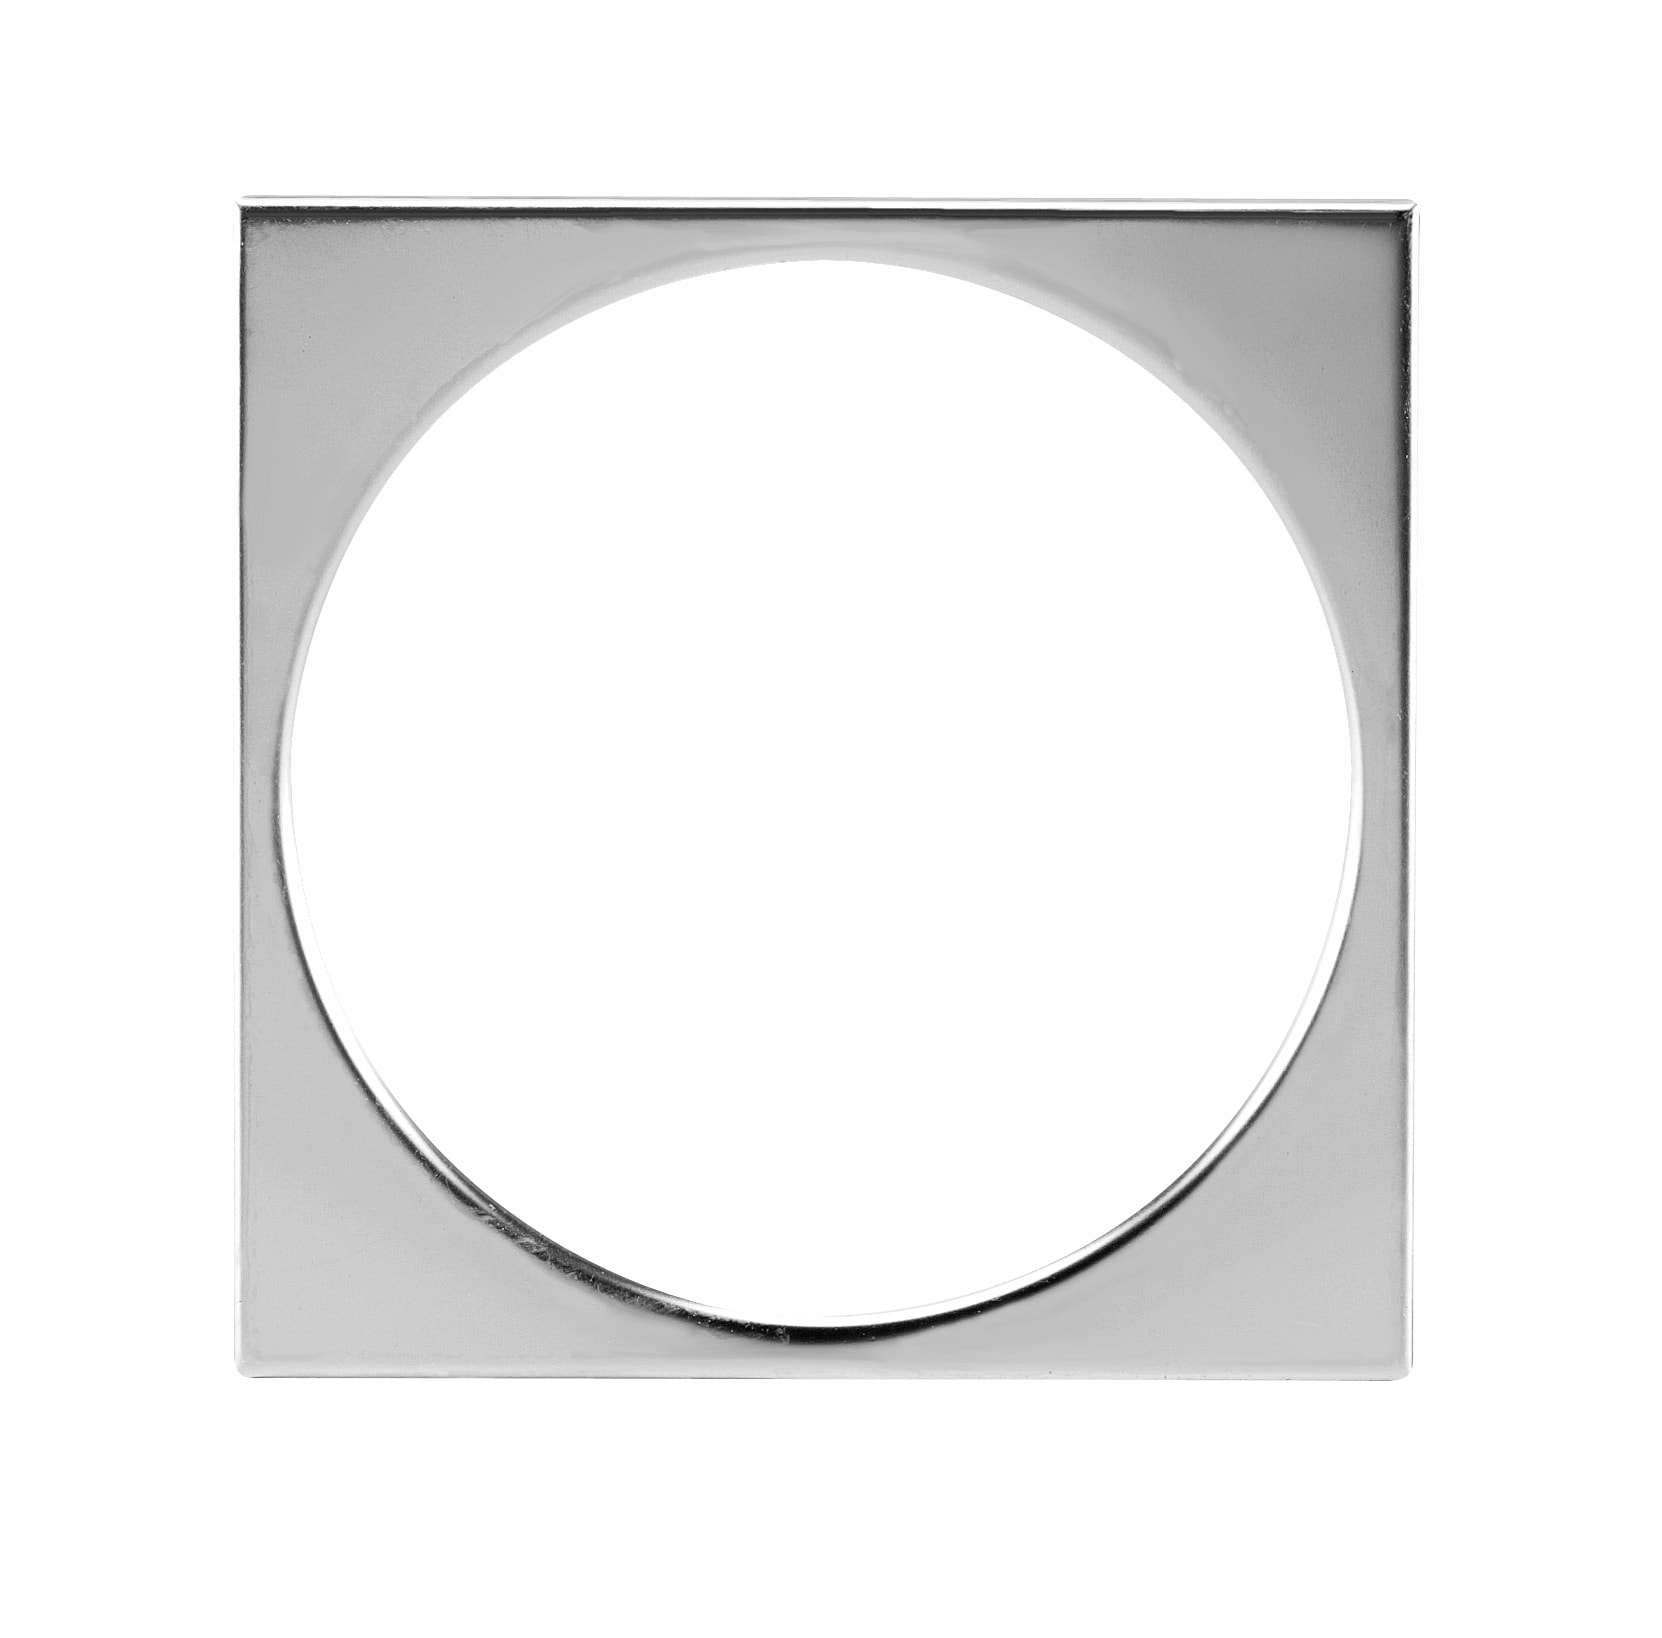 3-1/4 in. Round Screw-In Stainless Steel Shower Drain Cover with Tile Ring